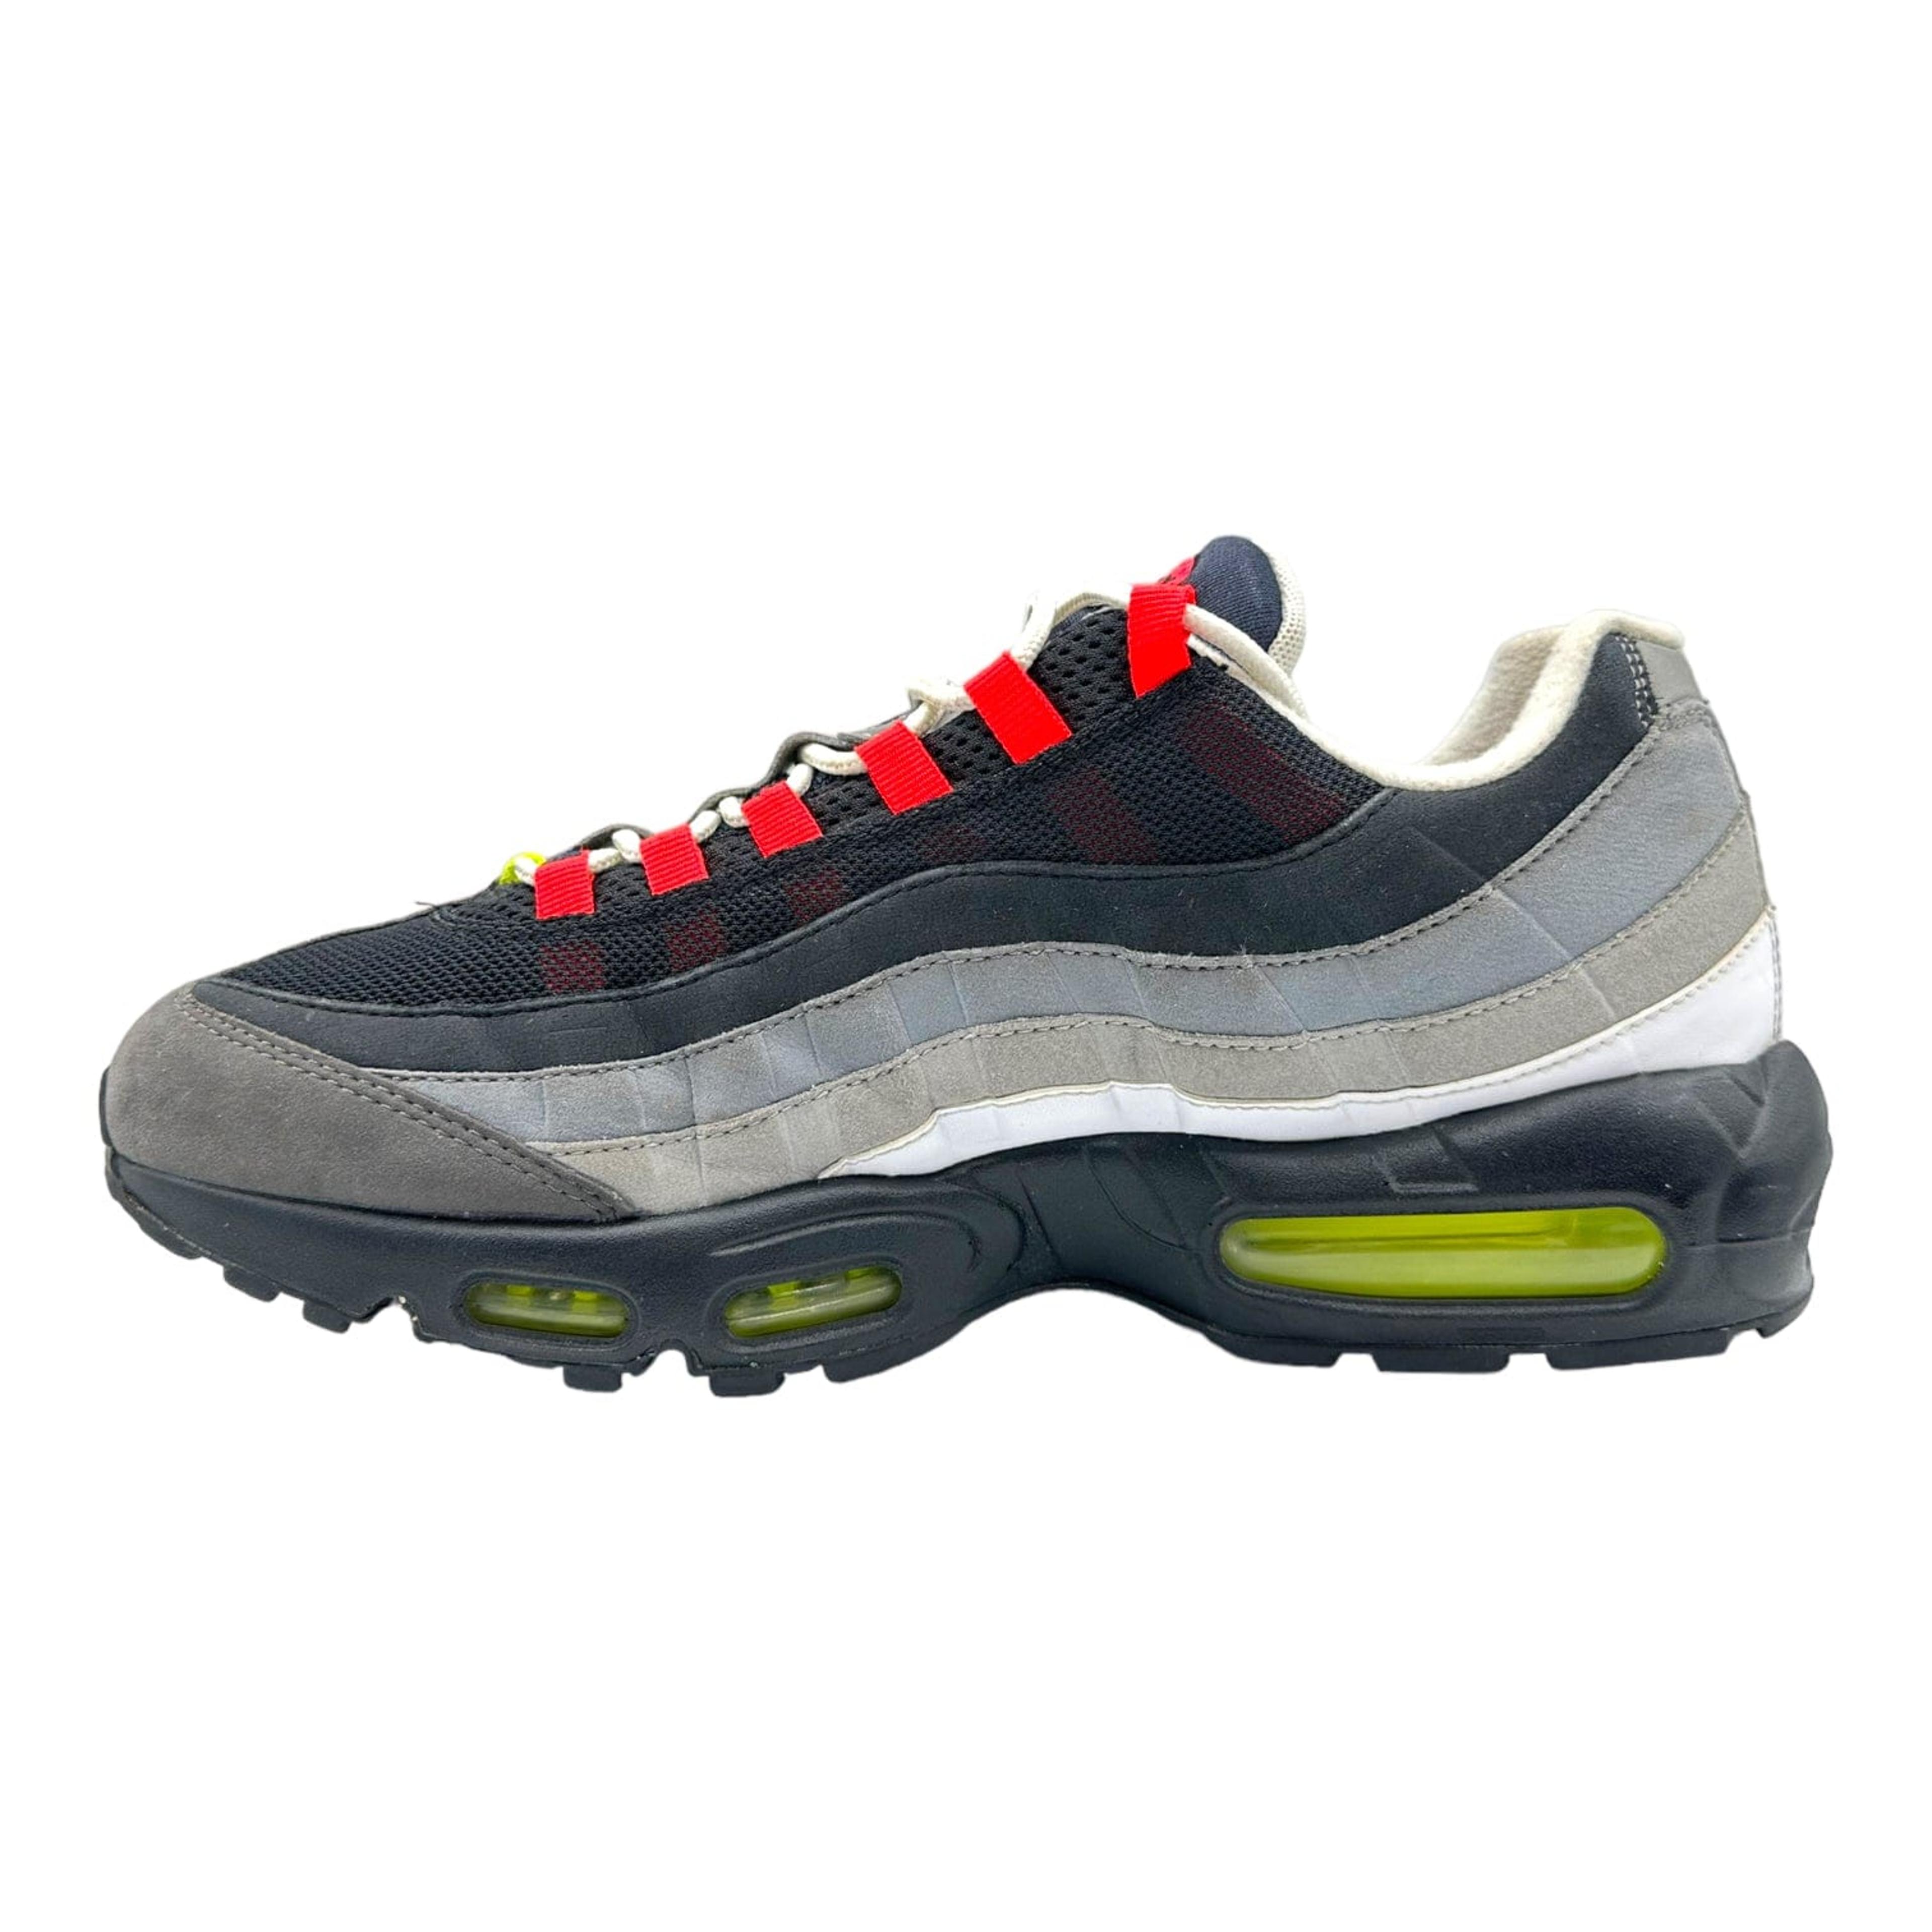 Alternate View 2 of Nike Air Max 95 What the Air Max Pre-Owned